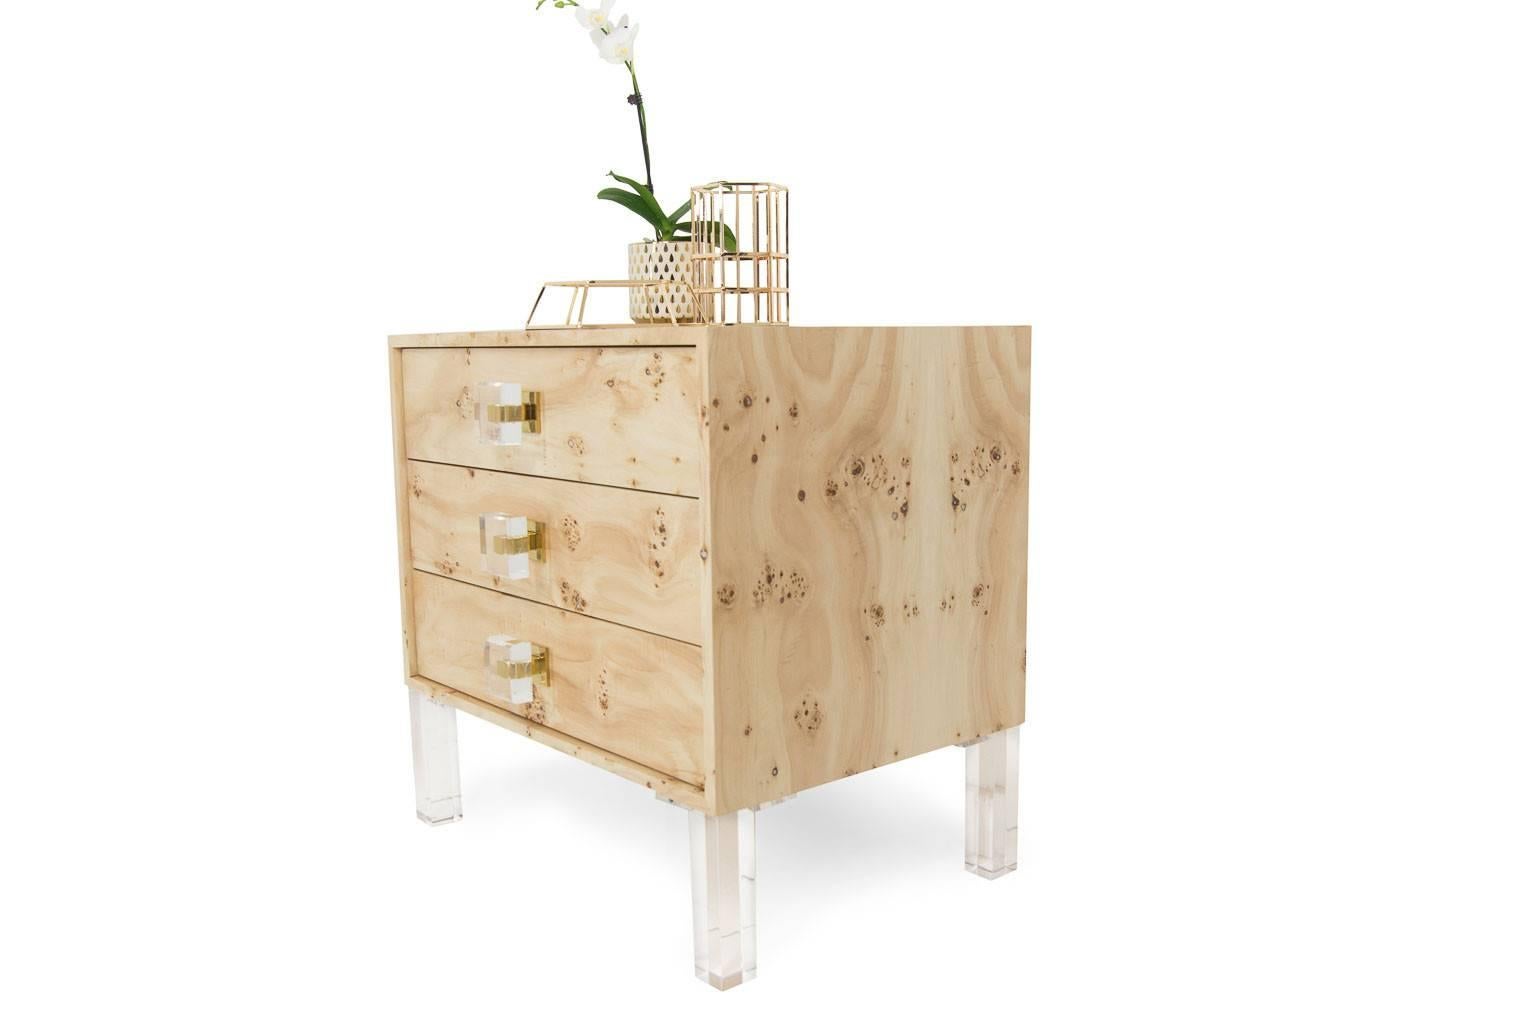 Introducing the all new Gold finger Collection. The Gold finger side table is finished in a burl wood veneer, showcasing the natural beauty of this type of wood. The drawers have lucite and brass square pulls, which all sits on top of our lucite